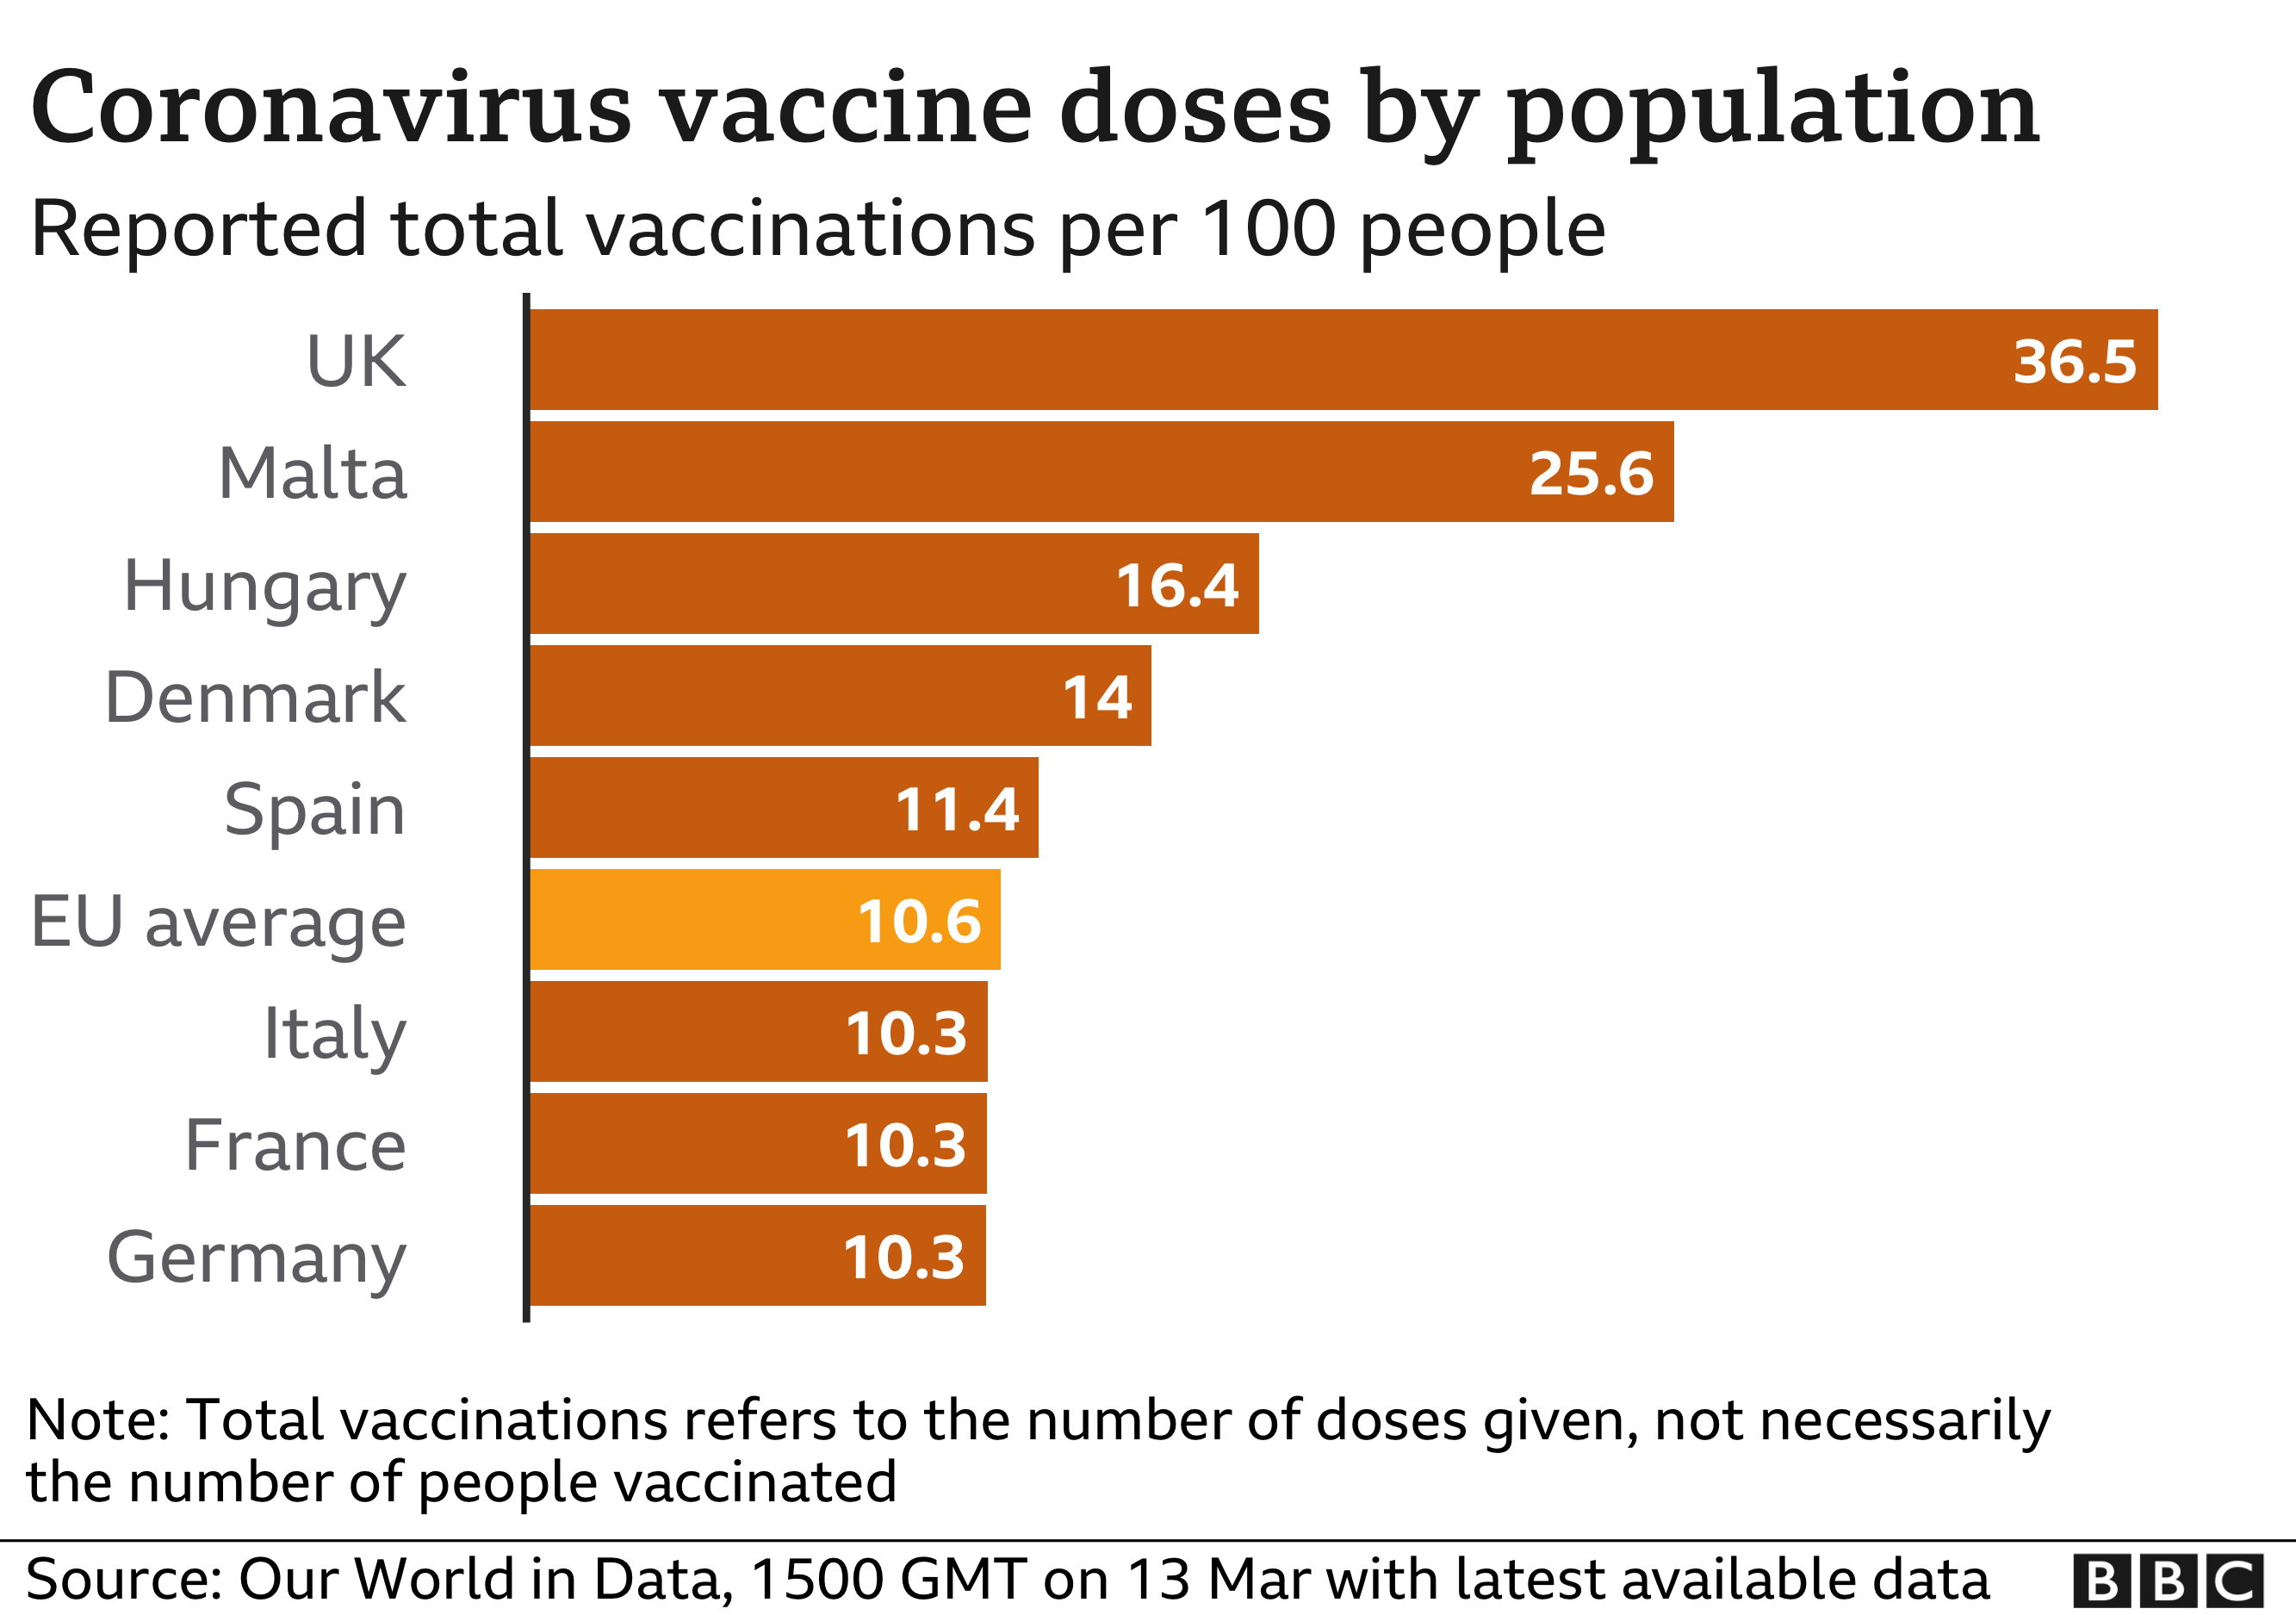 Vaccine doses by population 13-3-2021 - enlarge